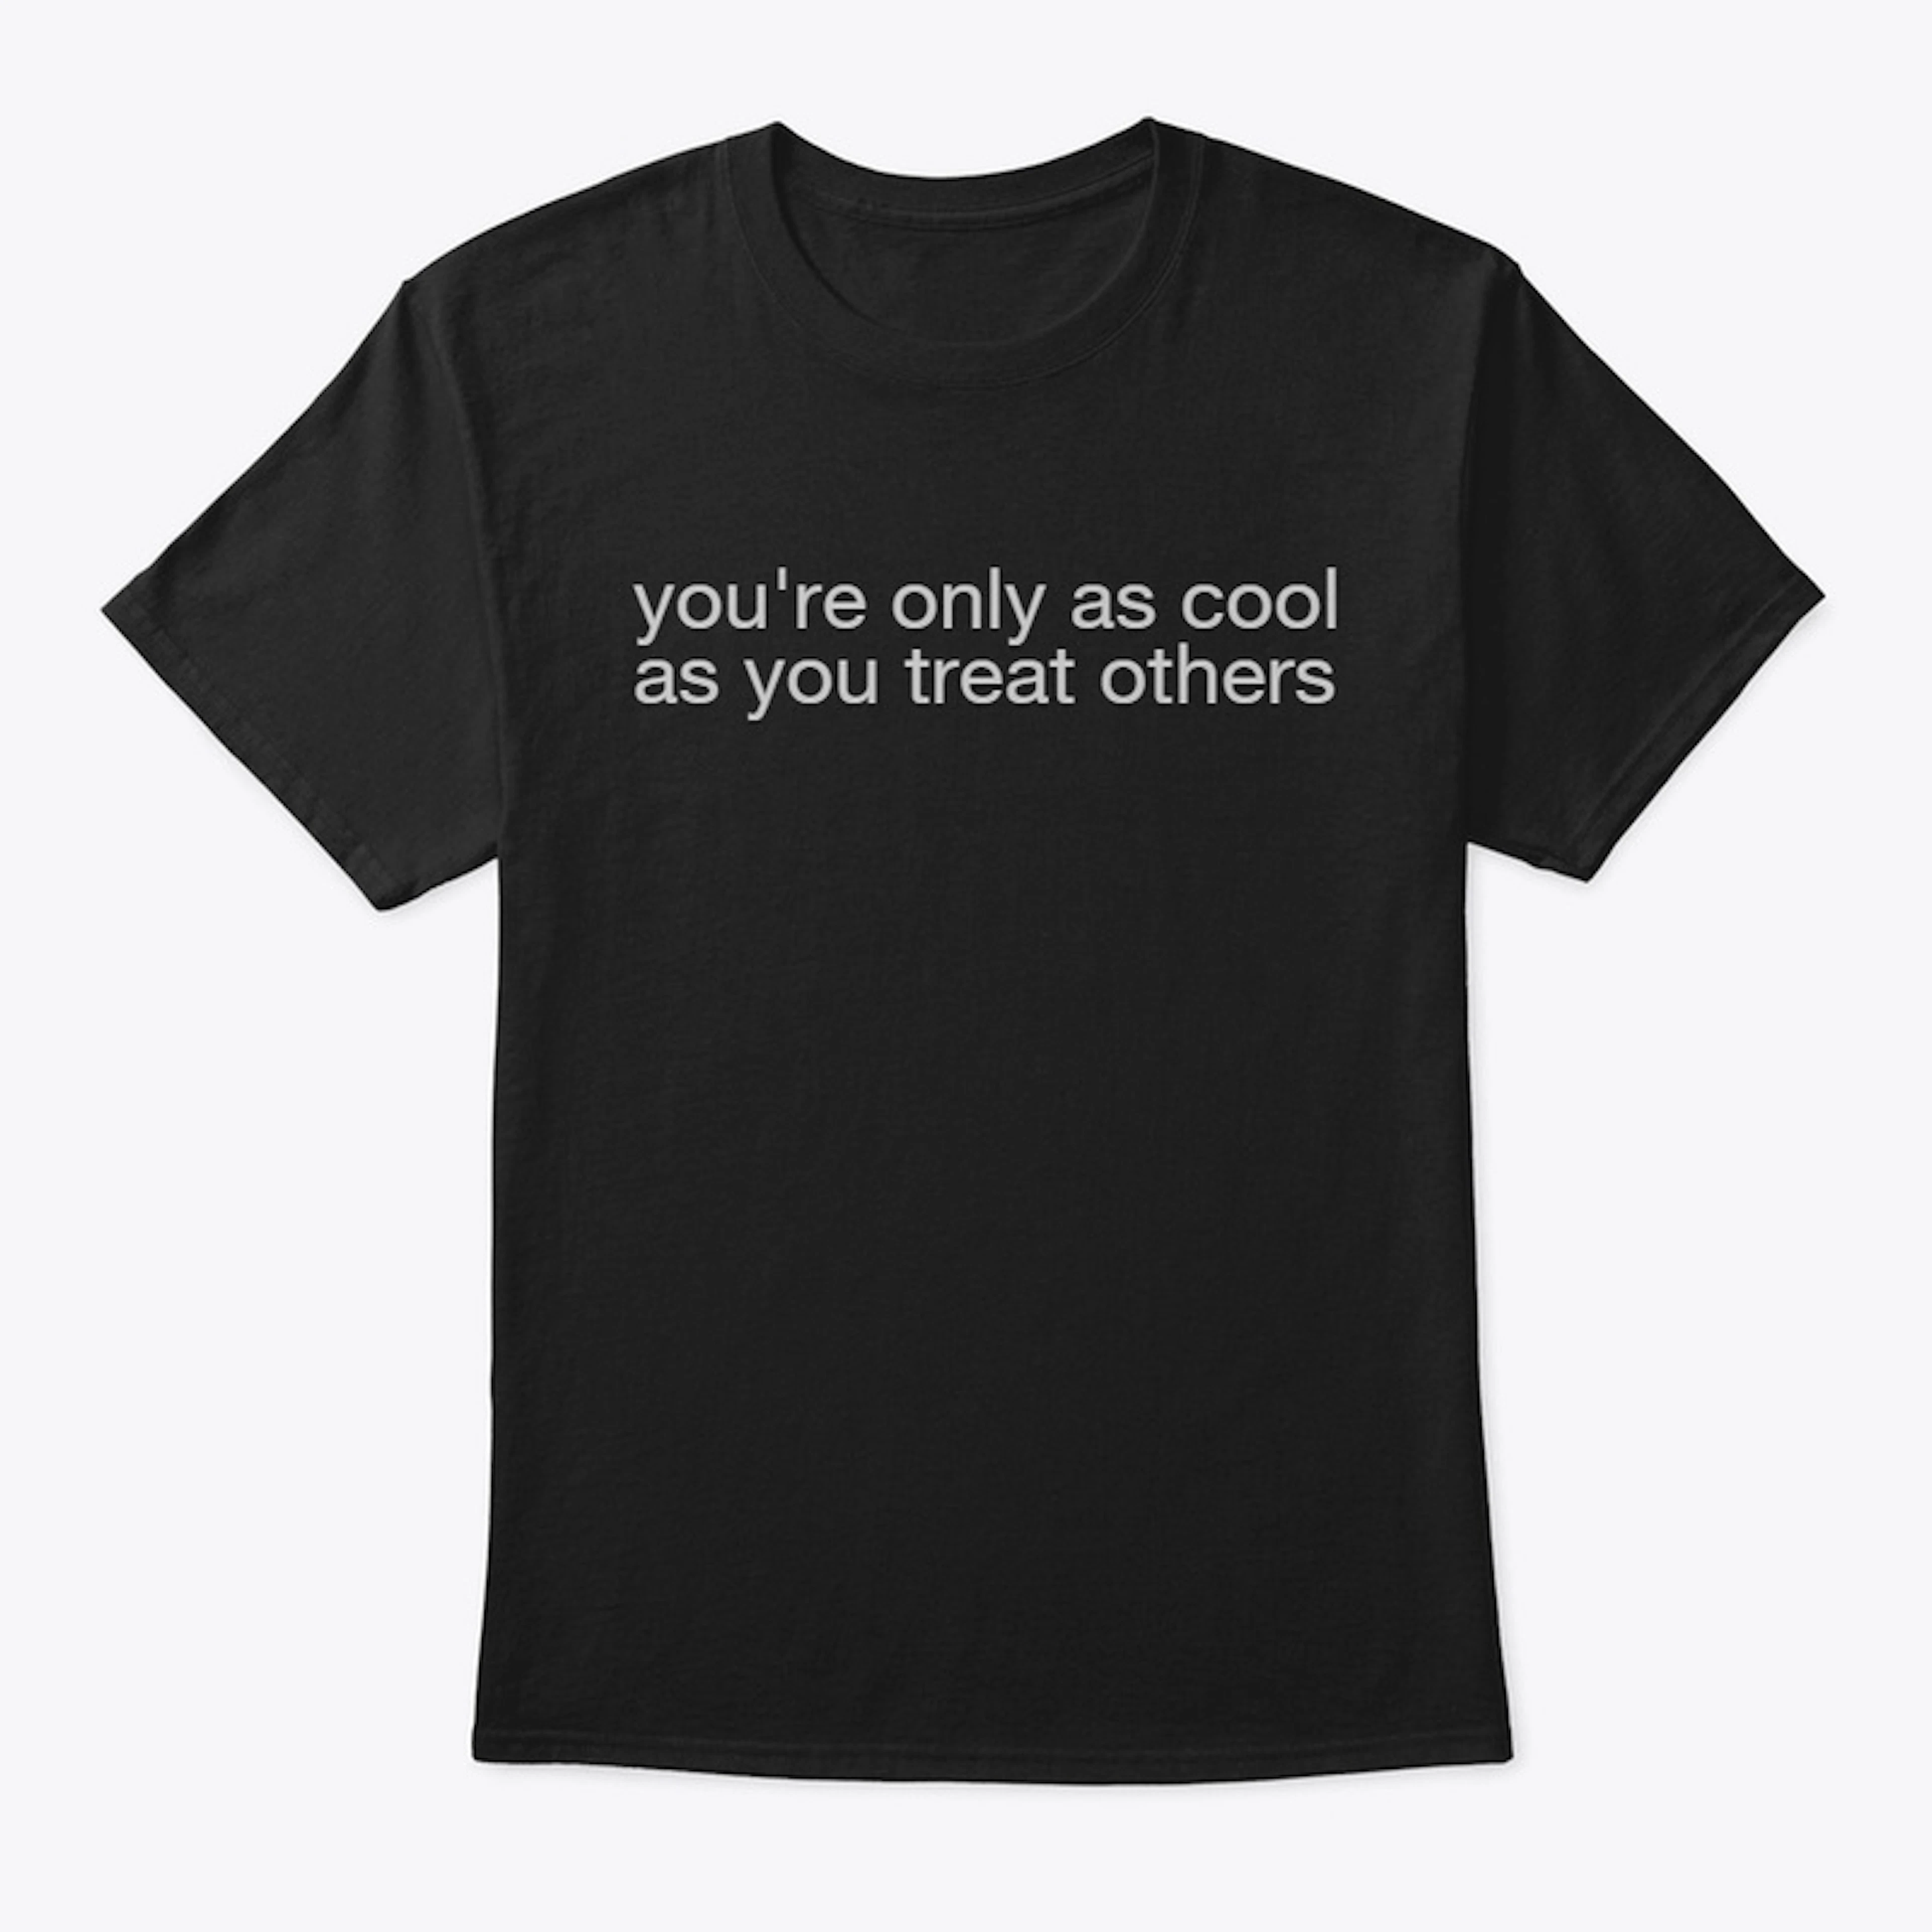 "you're only as cool (COLORED)